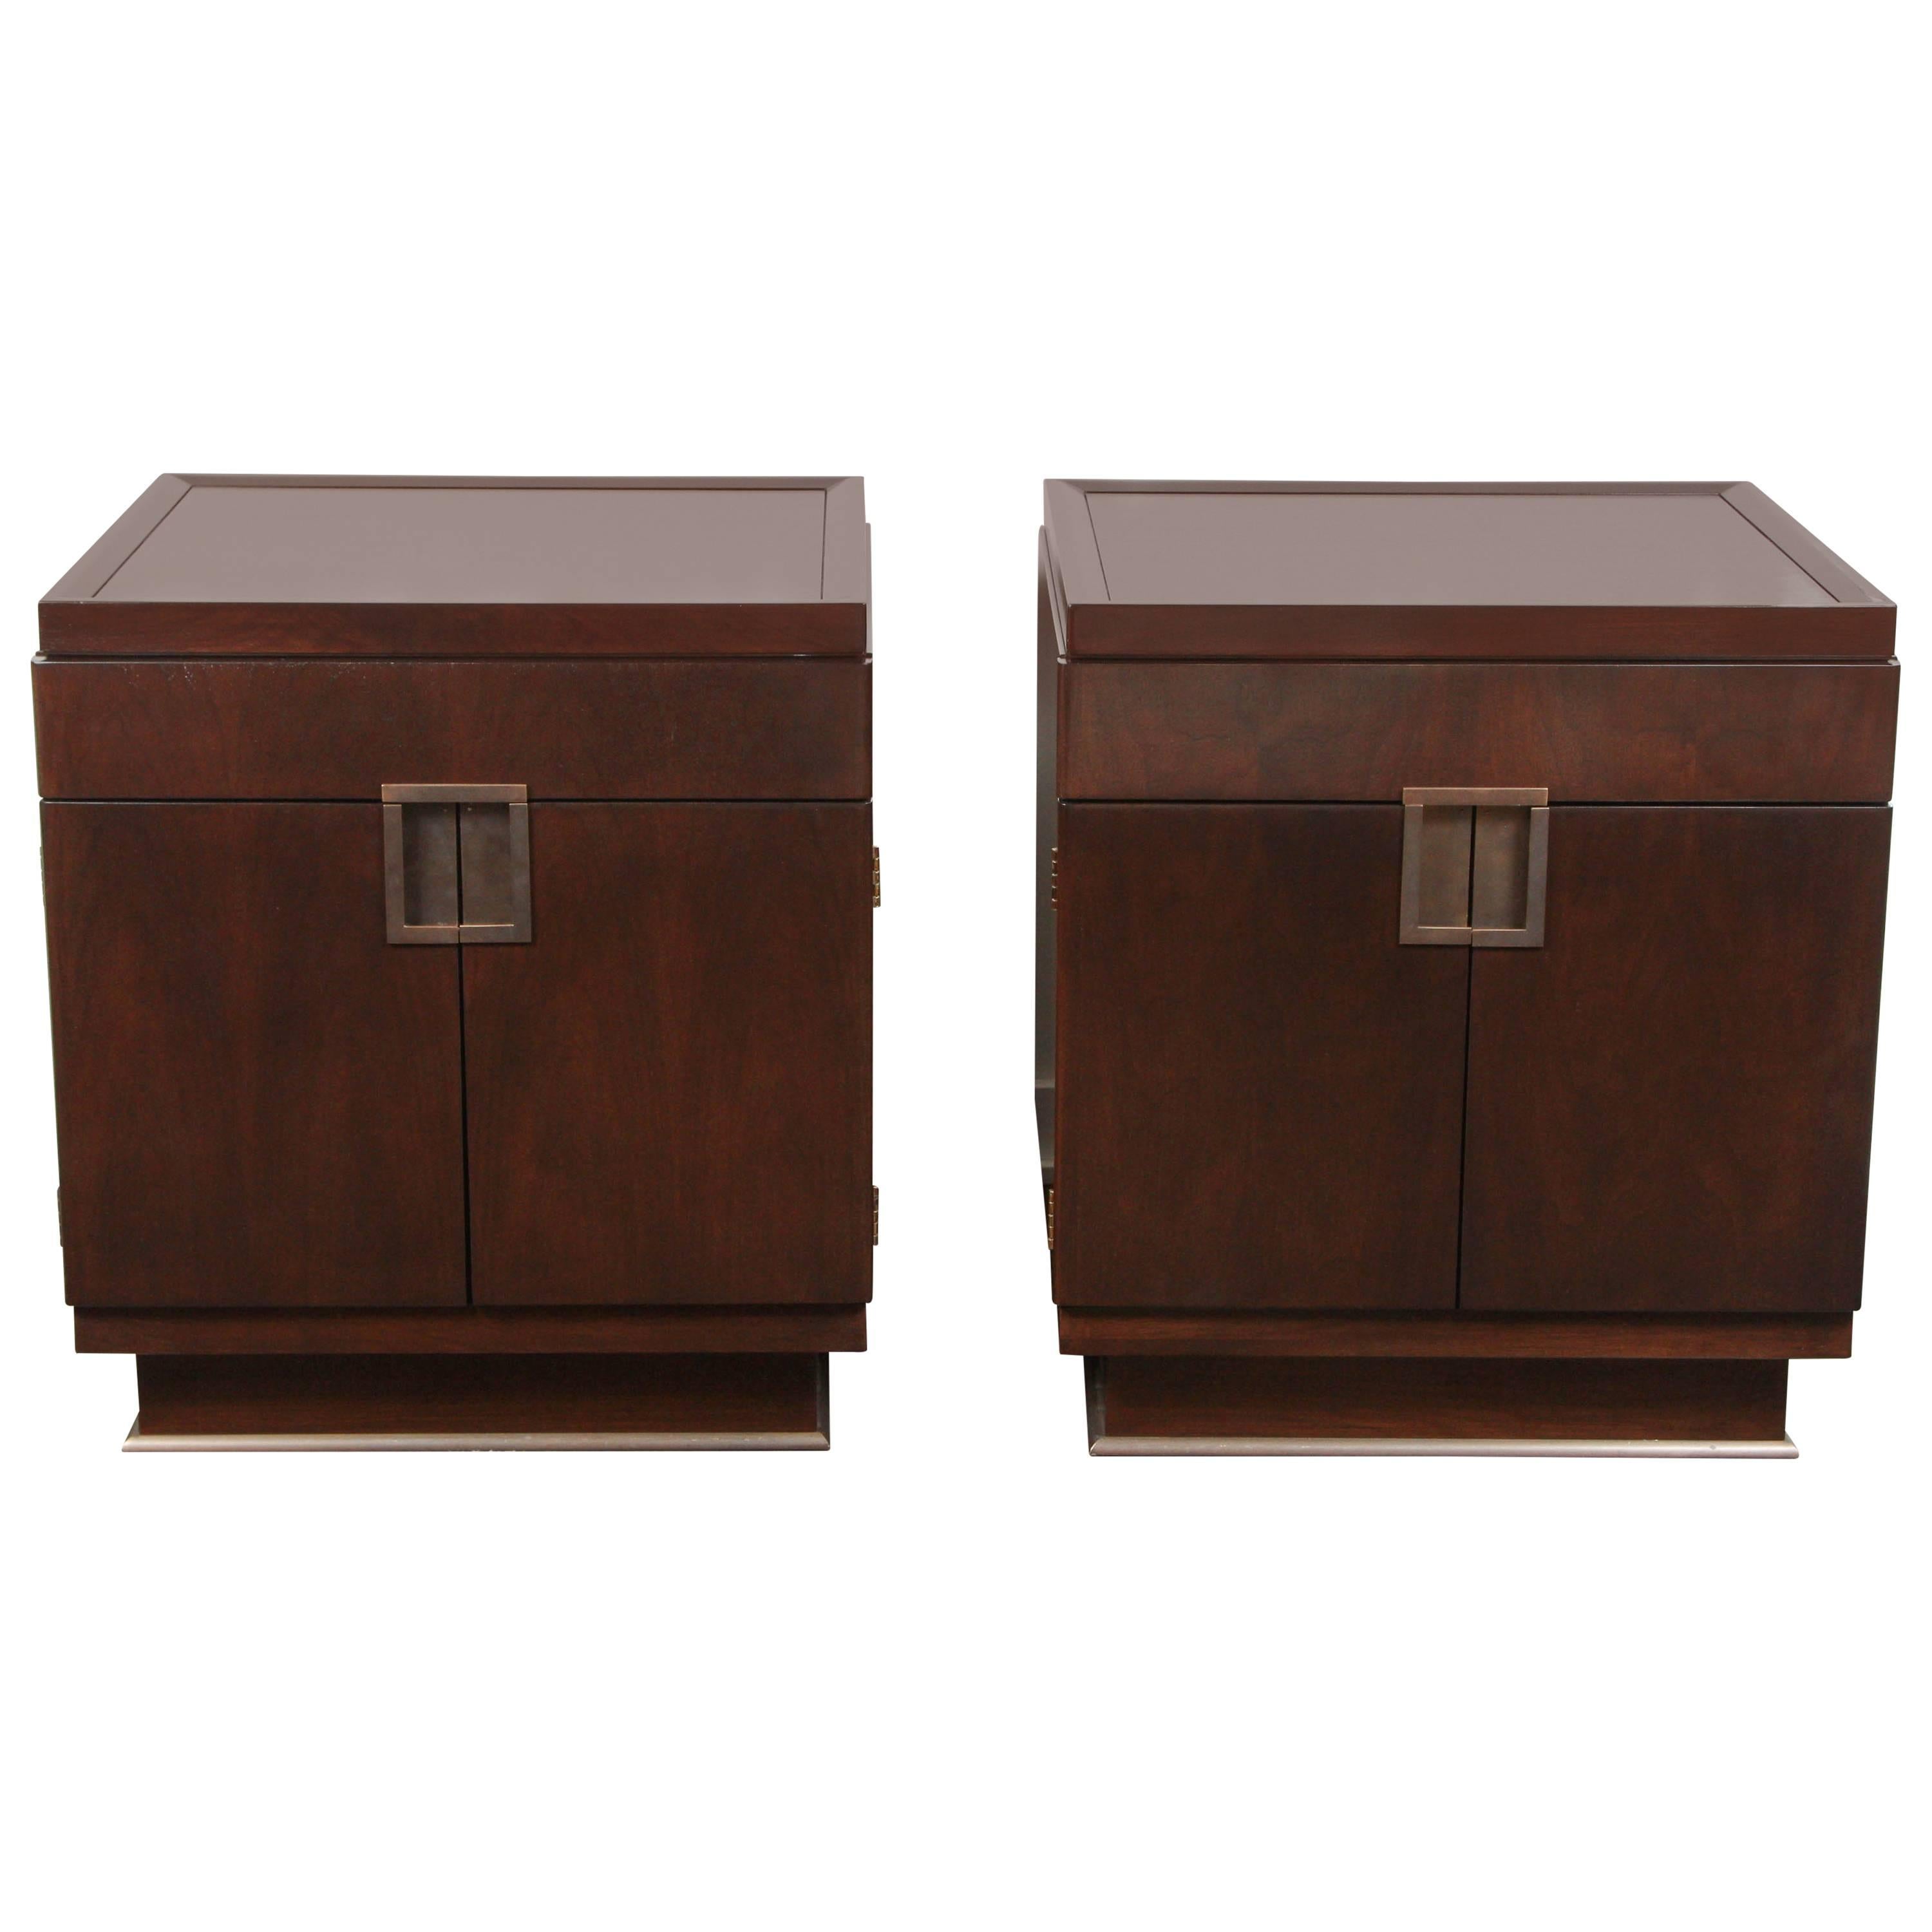 Pair of Boxer Chests by William Sofield for Baker